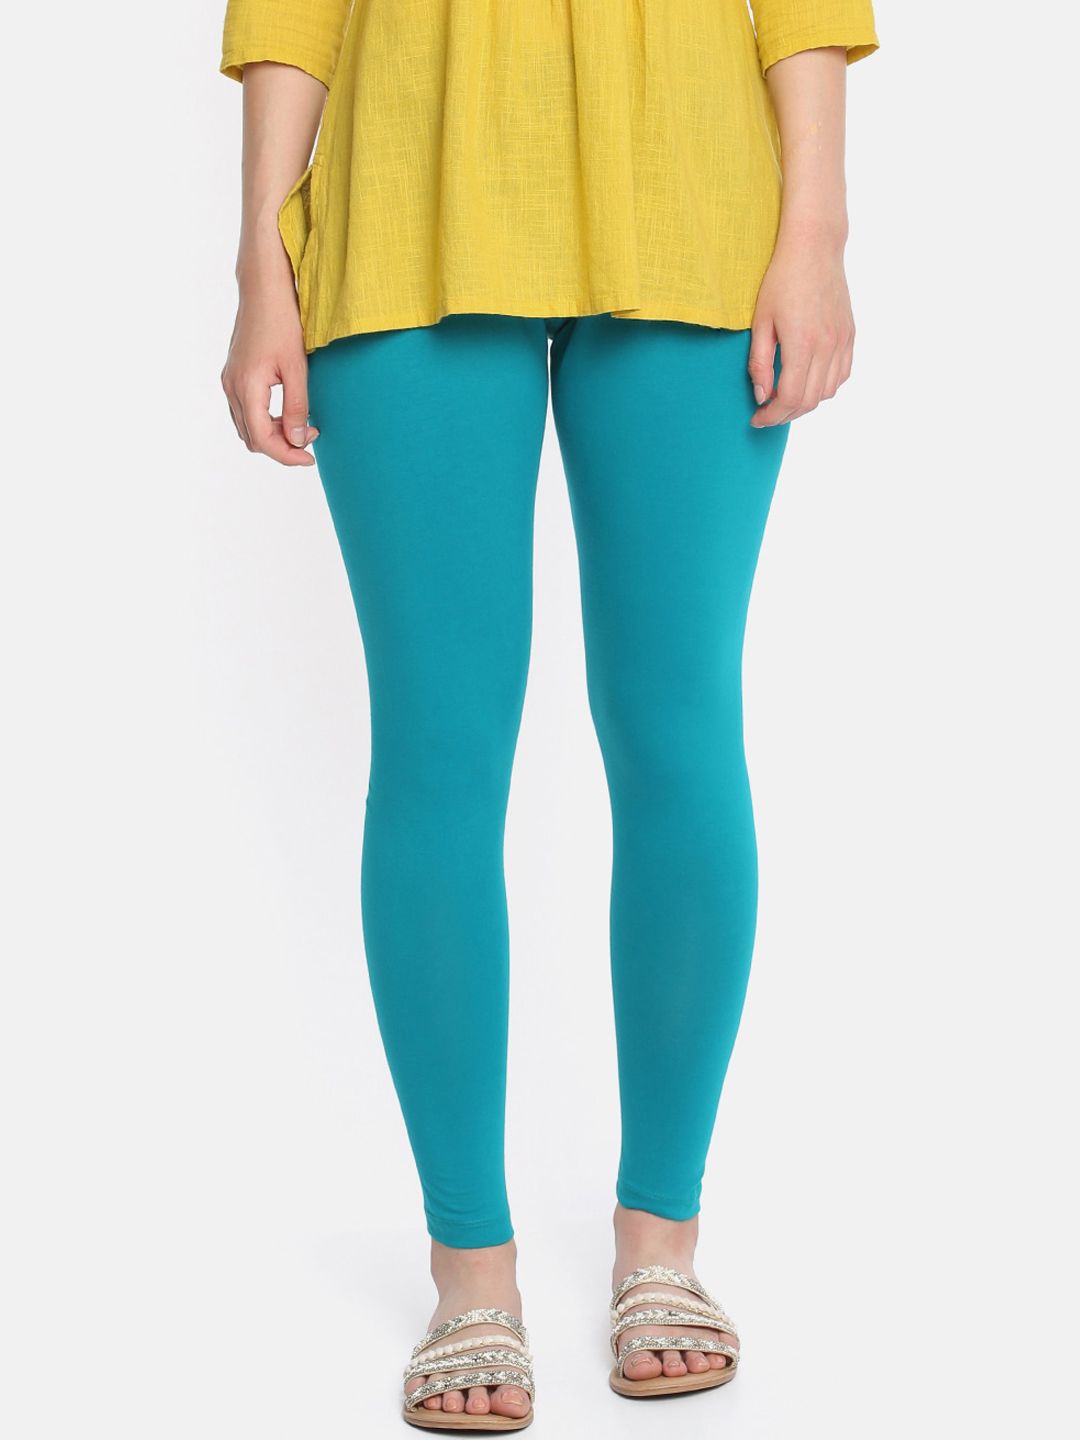 Dollar Missy Women Turquoise-blue Solid Ankle-Length Leggings Price in India